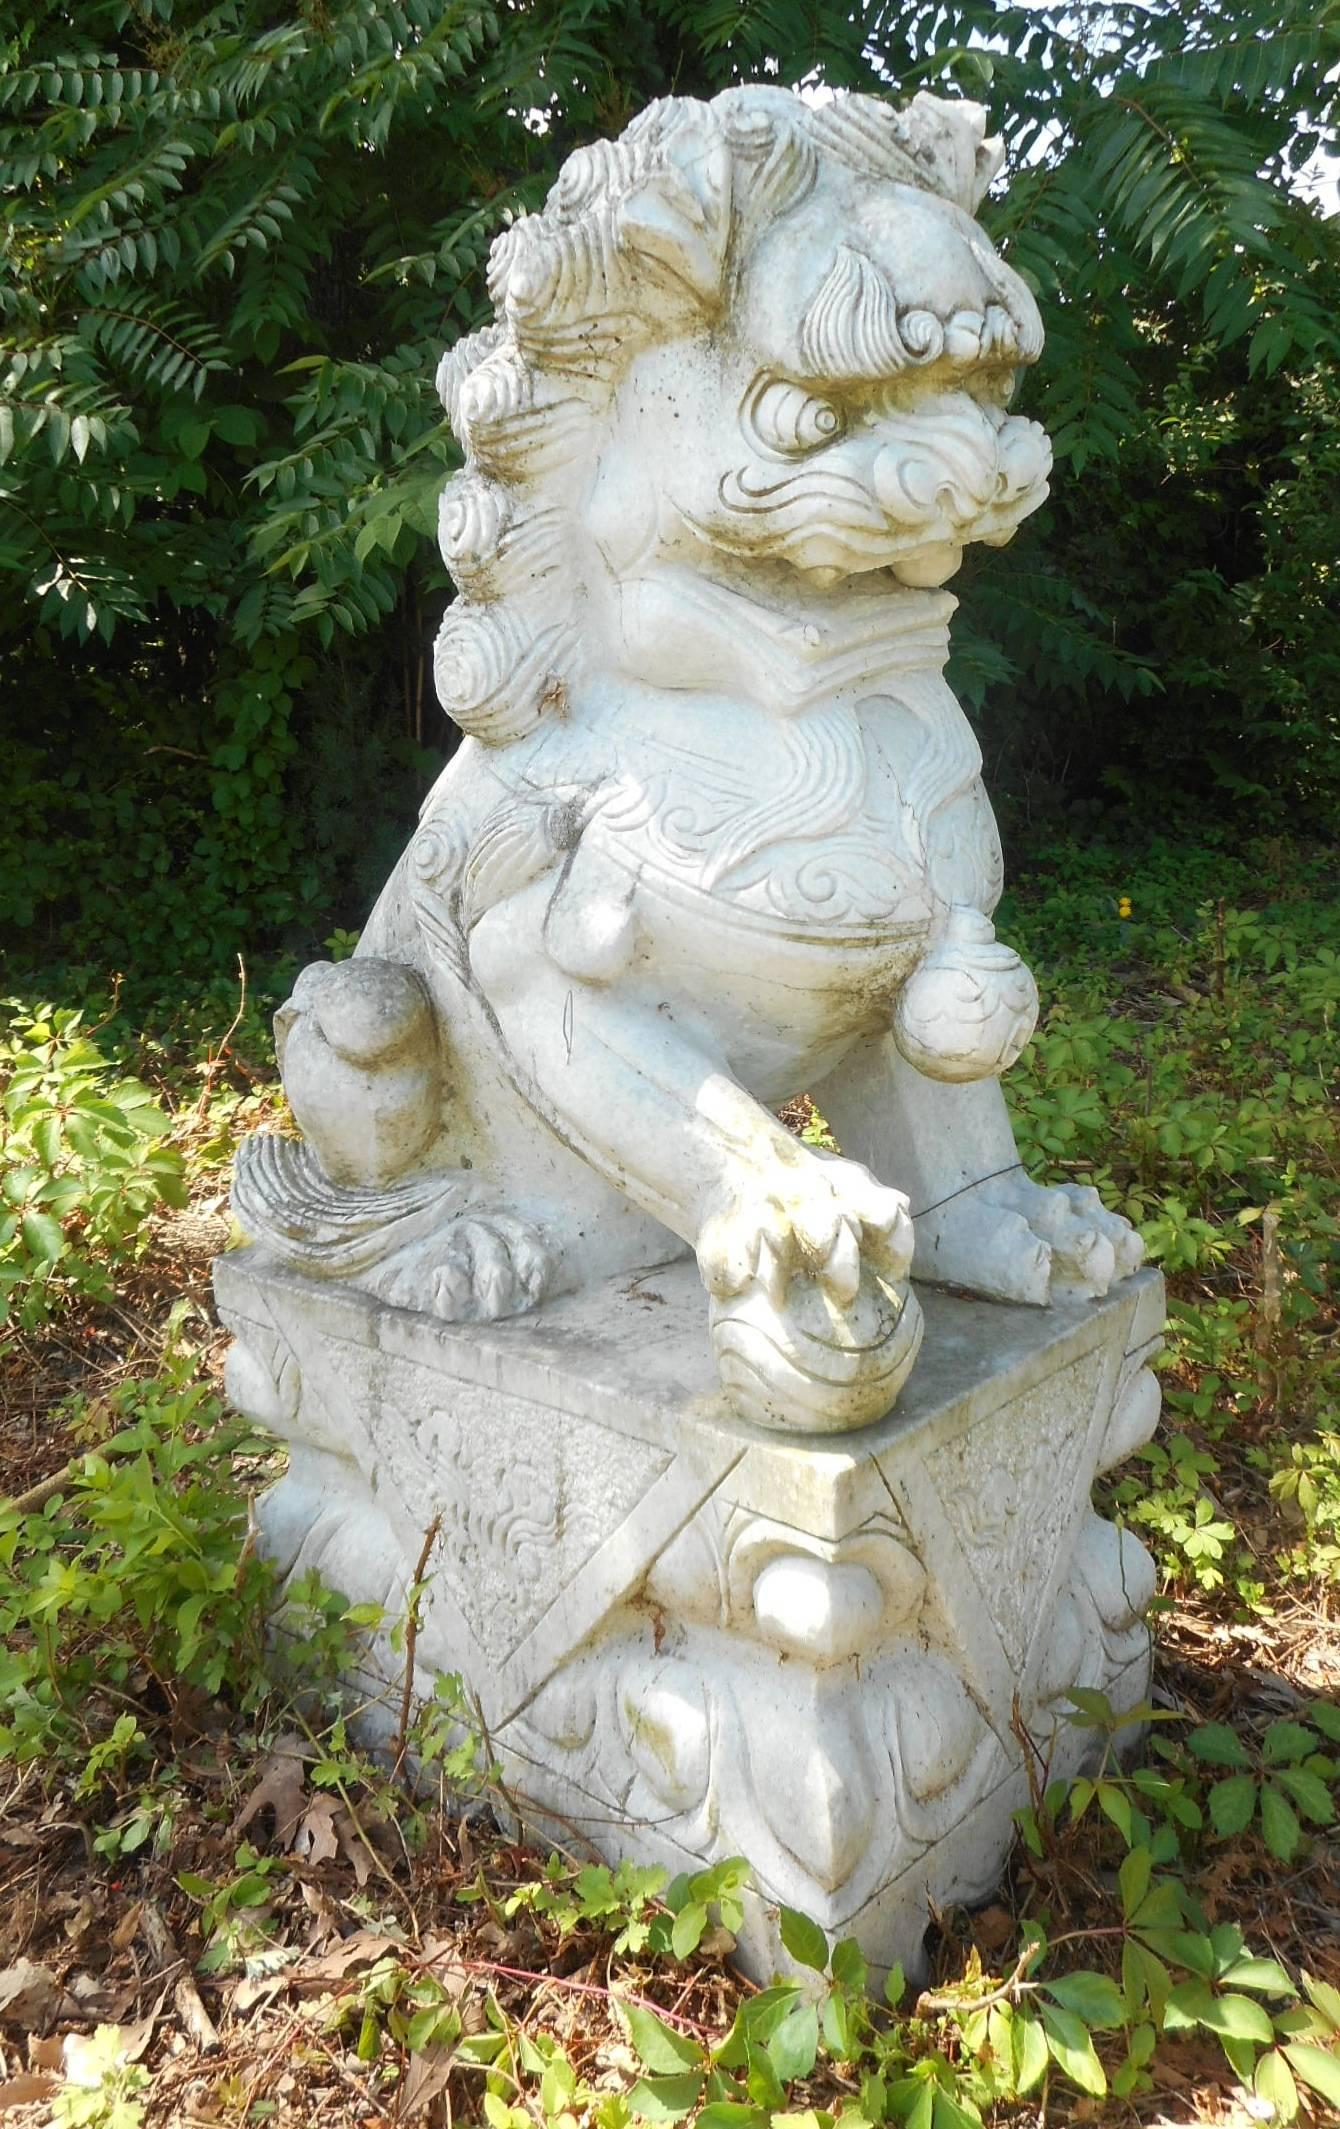 This beautiful pair of Chinese foo dogs are made of solid carved white marble and stand at 48 inches tall. This traditional piece has curly hair and sits on a pedestal. Elegant design shows intricate detail and quality construction. This graceful